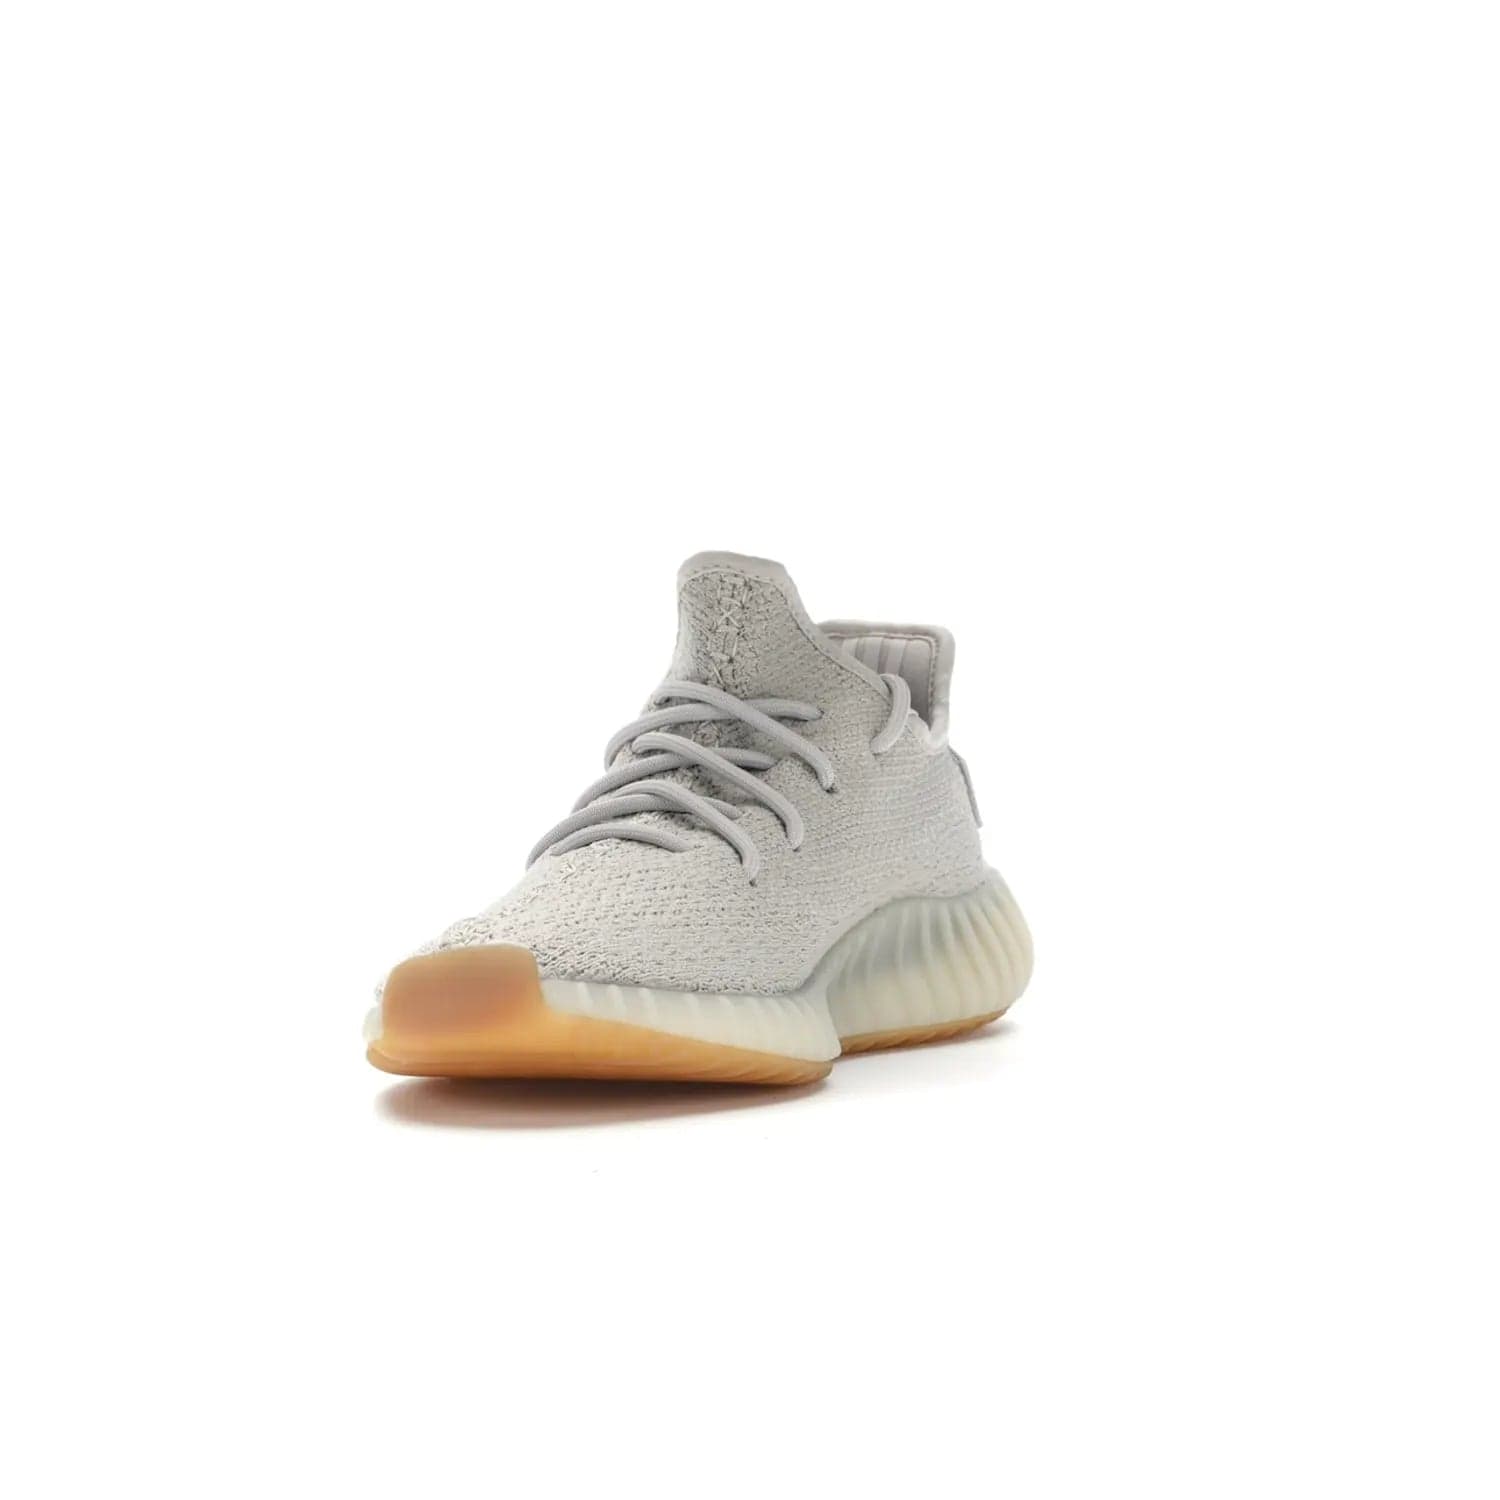 adidas Yeezy Boost 350 V2 Sesame - Image 13 - Only at www.BallersClubKickz.com - Introducing the adidas Yeezy Boost 350 V2 Sesame. Featuring a sesame upper, midsole and gum sole for a sleek silhouette. Cop the stylish sneaker released in November 2018.